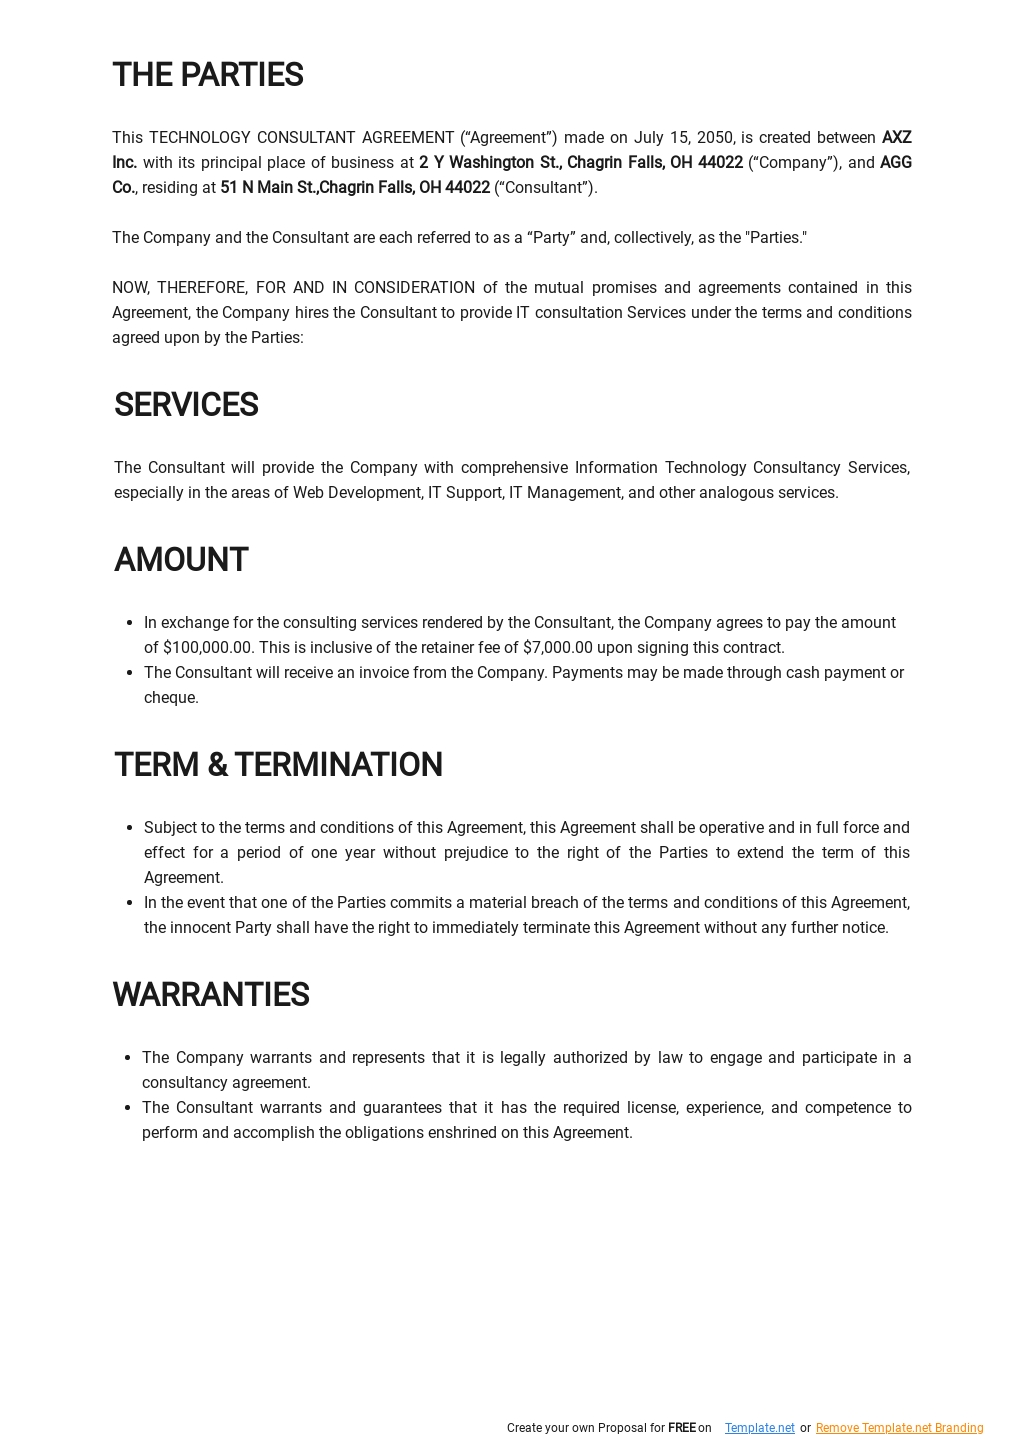 Technology Consulting Agreement Template 1.jpe